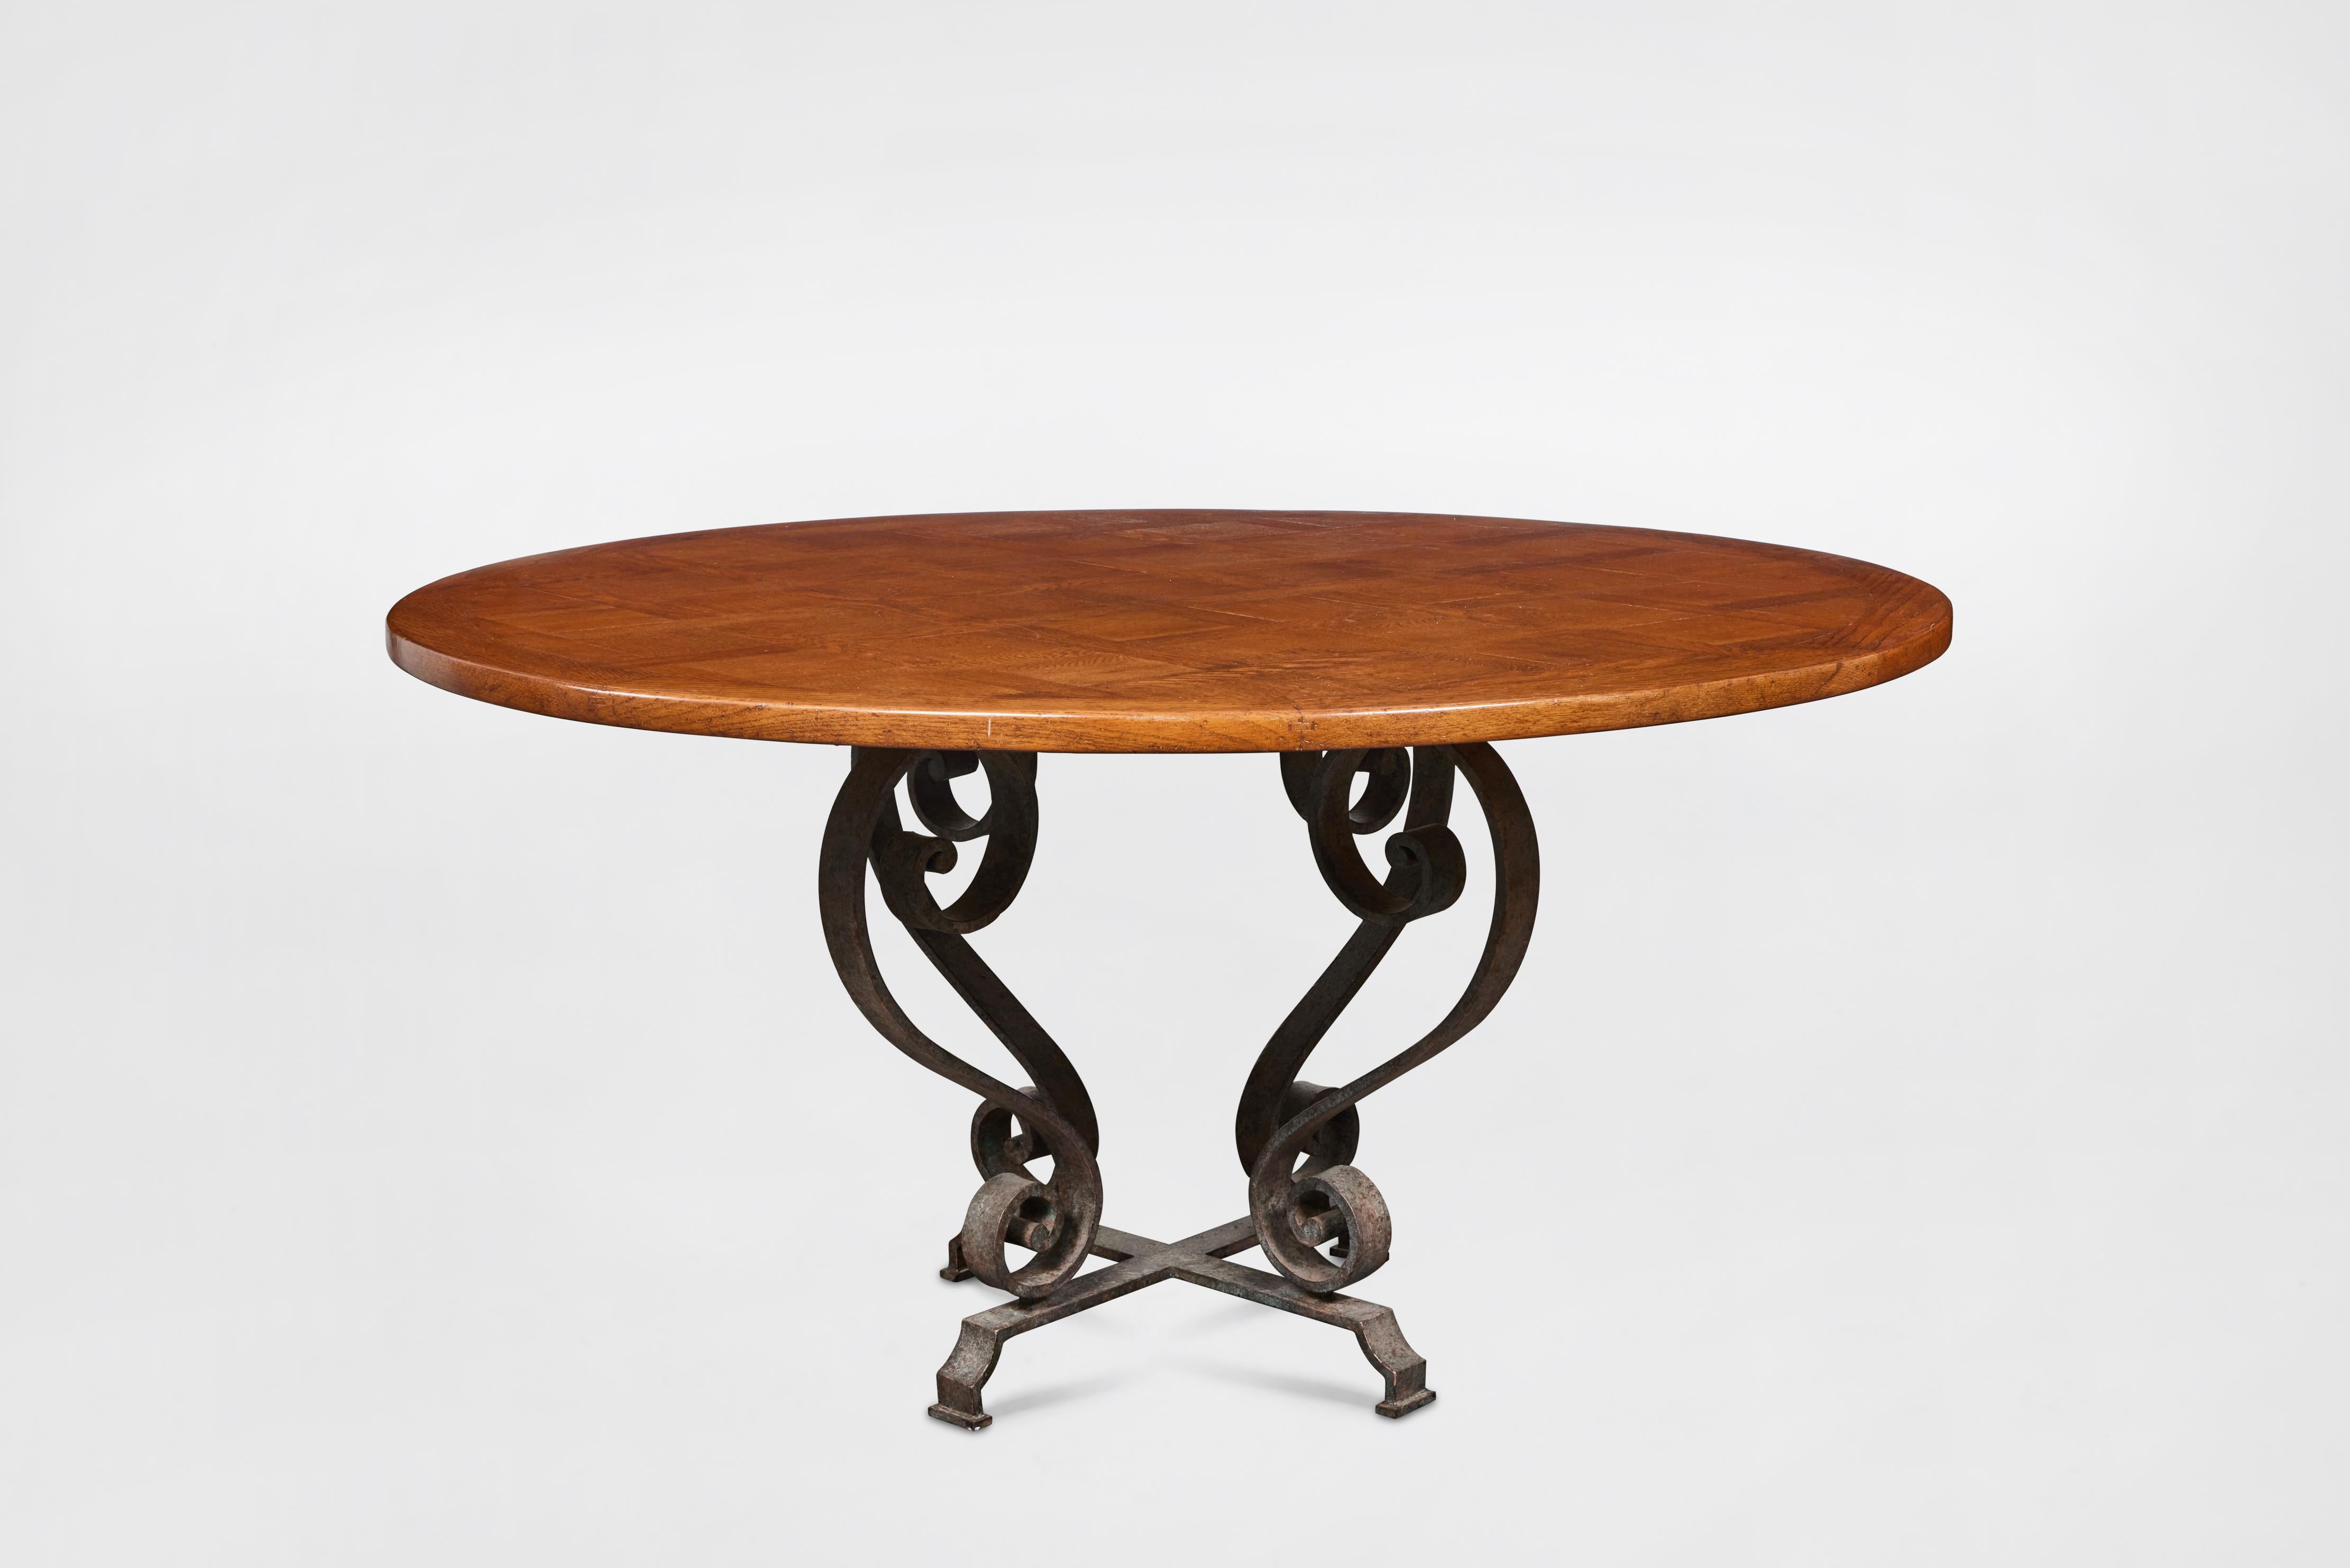 Custom made dining table with round mahogany top and wrought iron base. Made by John Hall Designs, Los Angeles, circa 1990. 